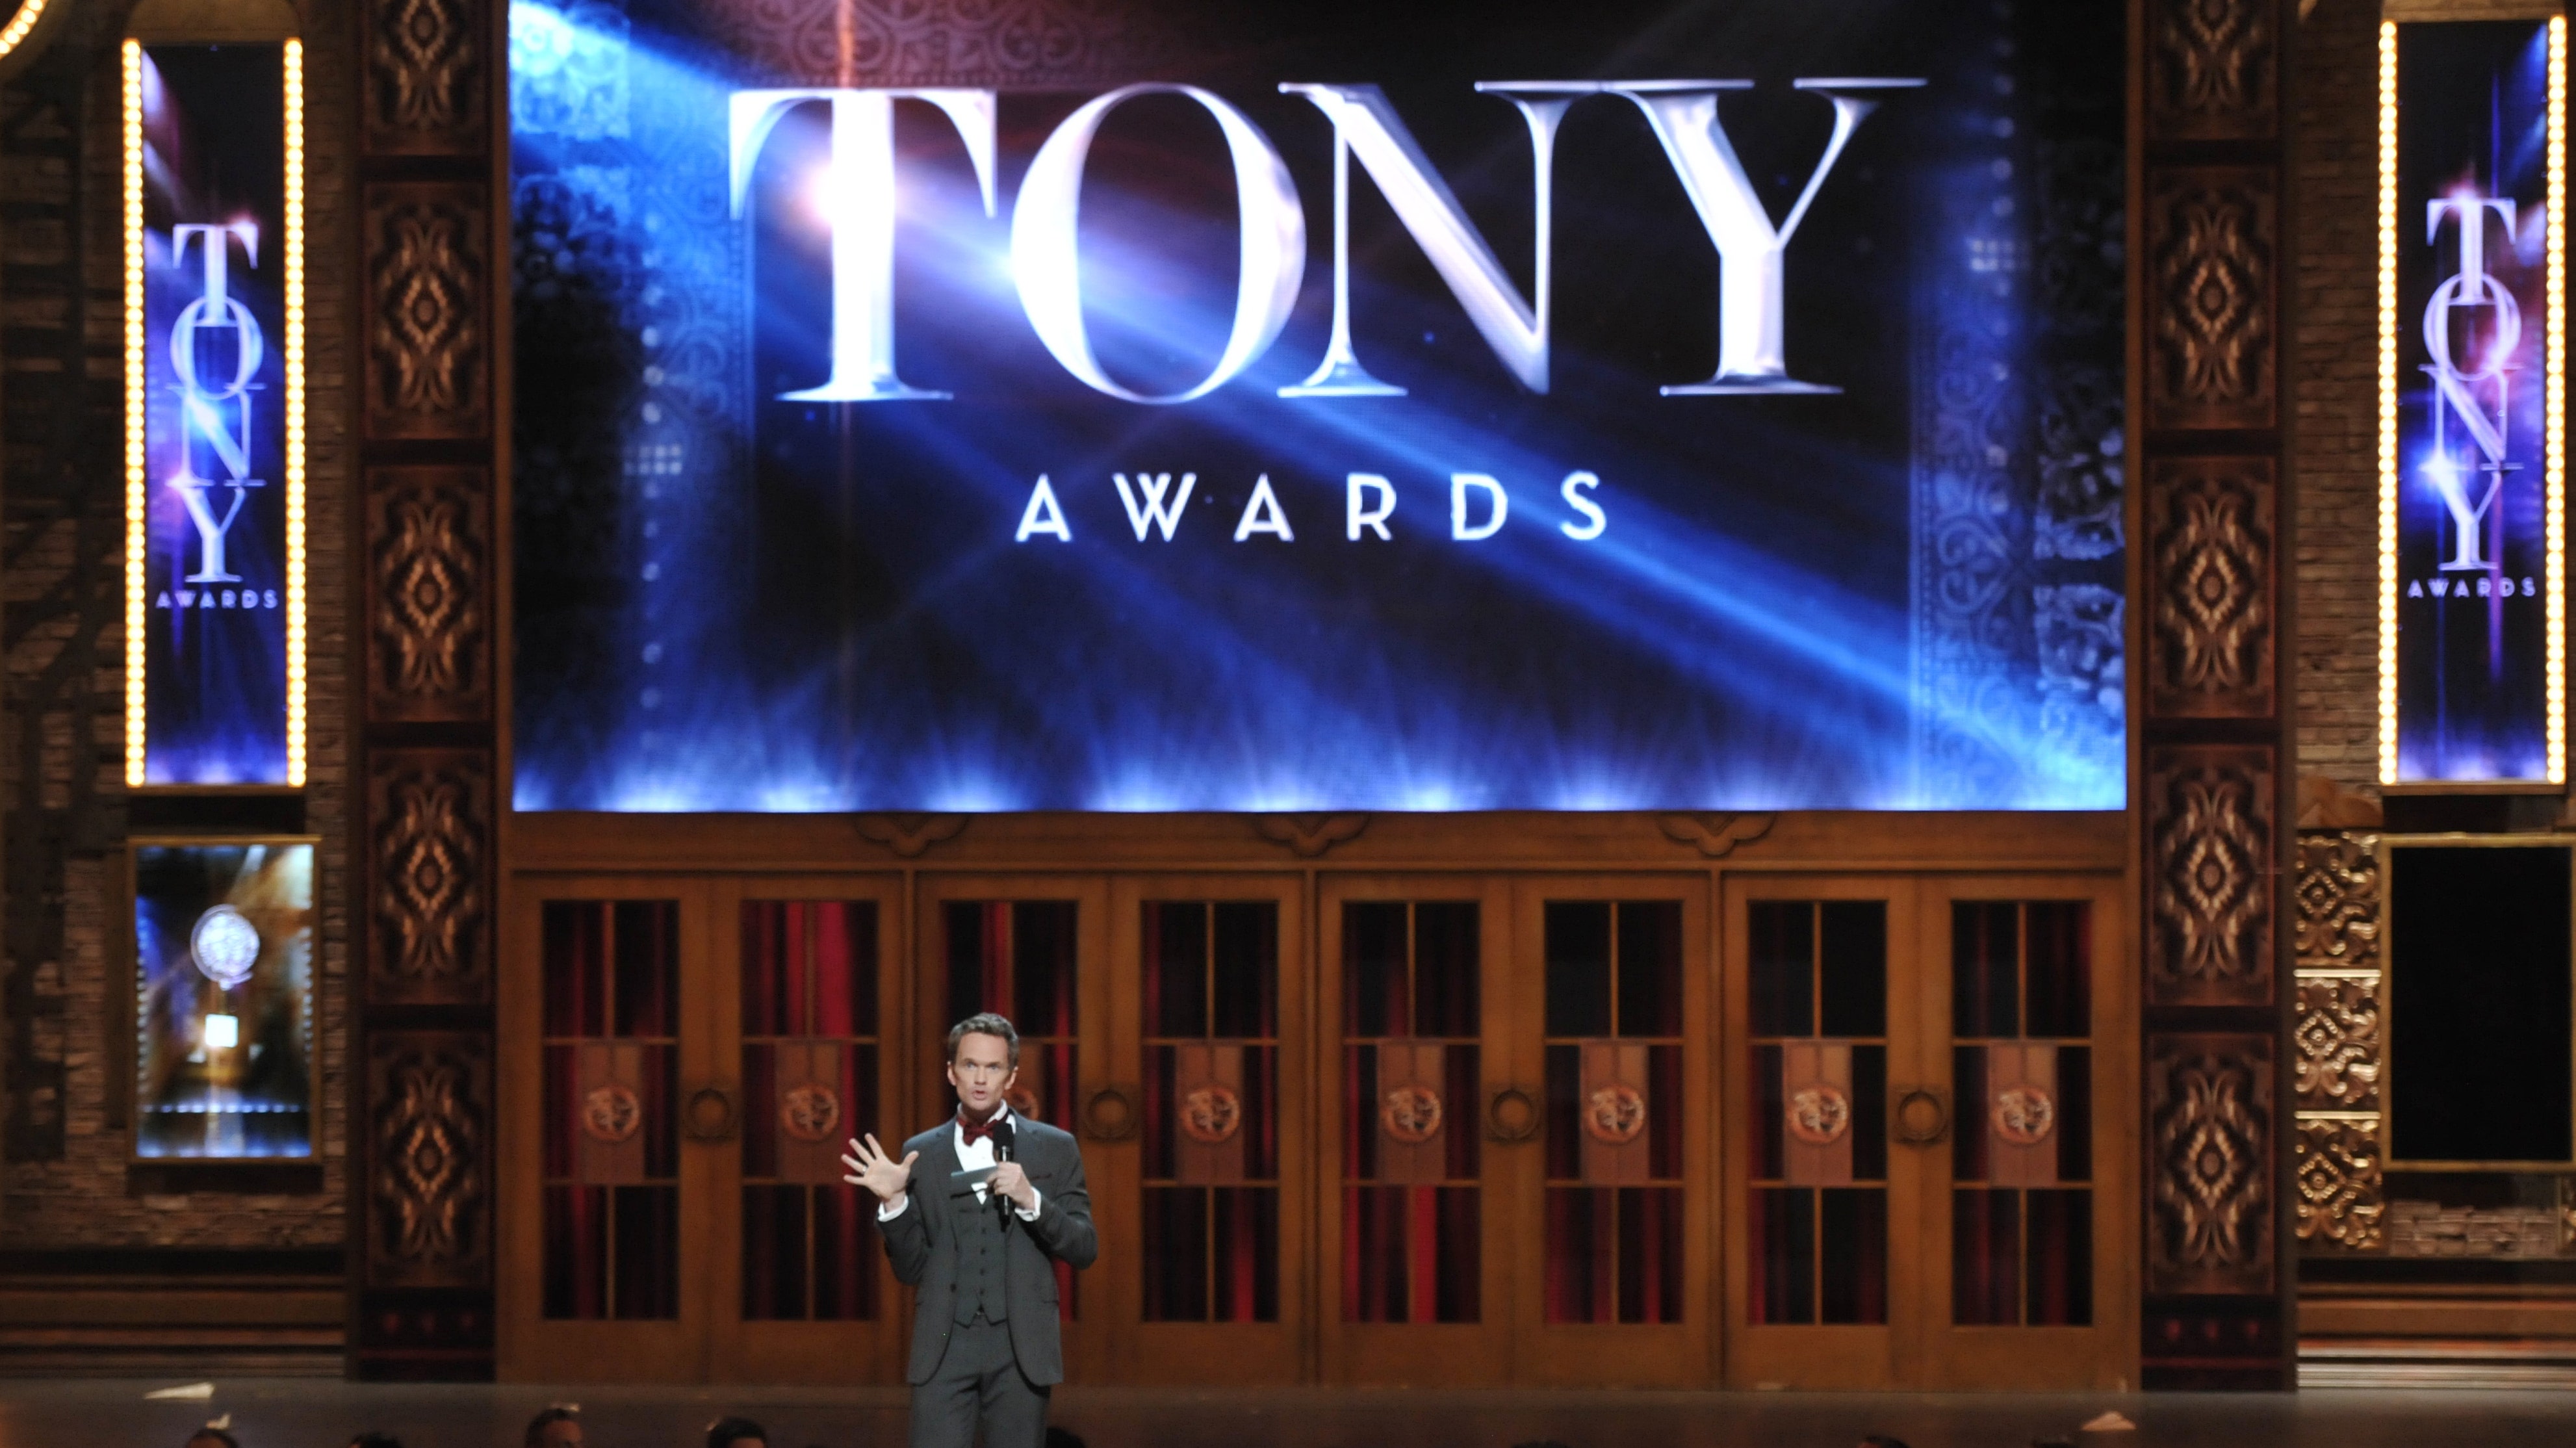 74th annual Tony Awards to be held at Winter Garden Theatre in NYC